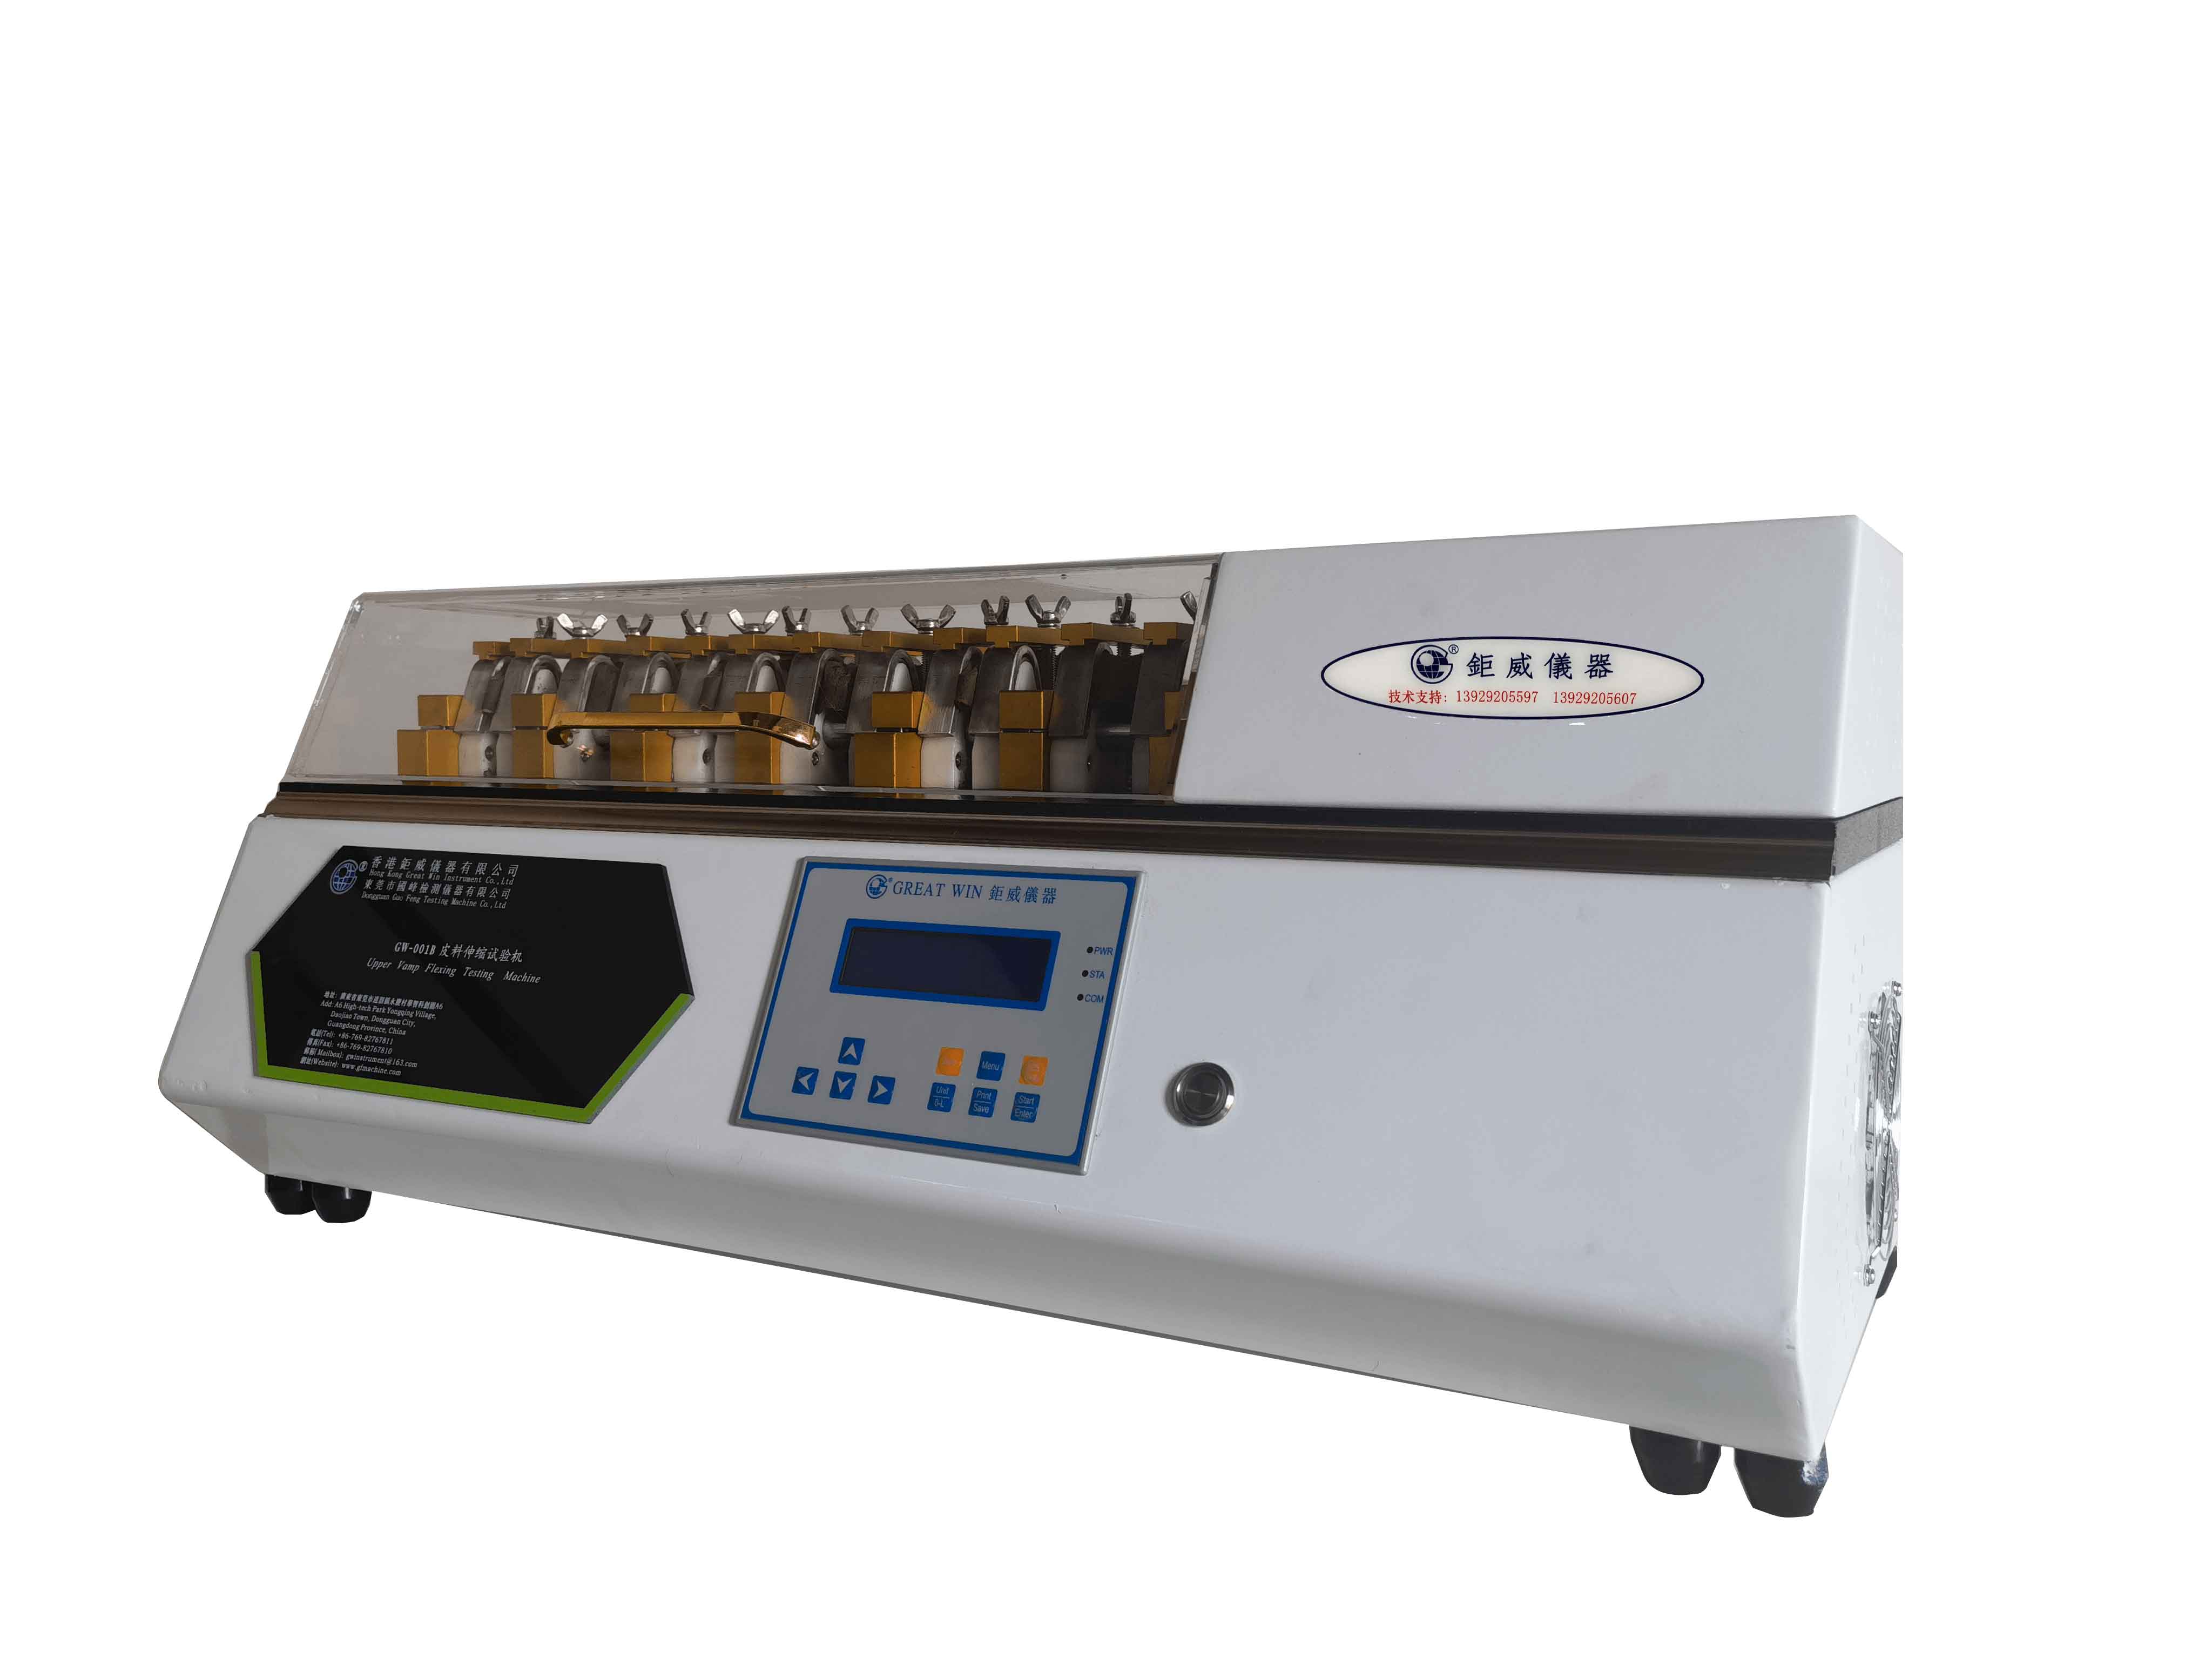 Shoes Flexing Tester ,Finished Shoes Bending Testing Machine,Whole Shoes Flexing Tester